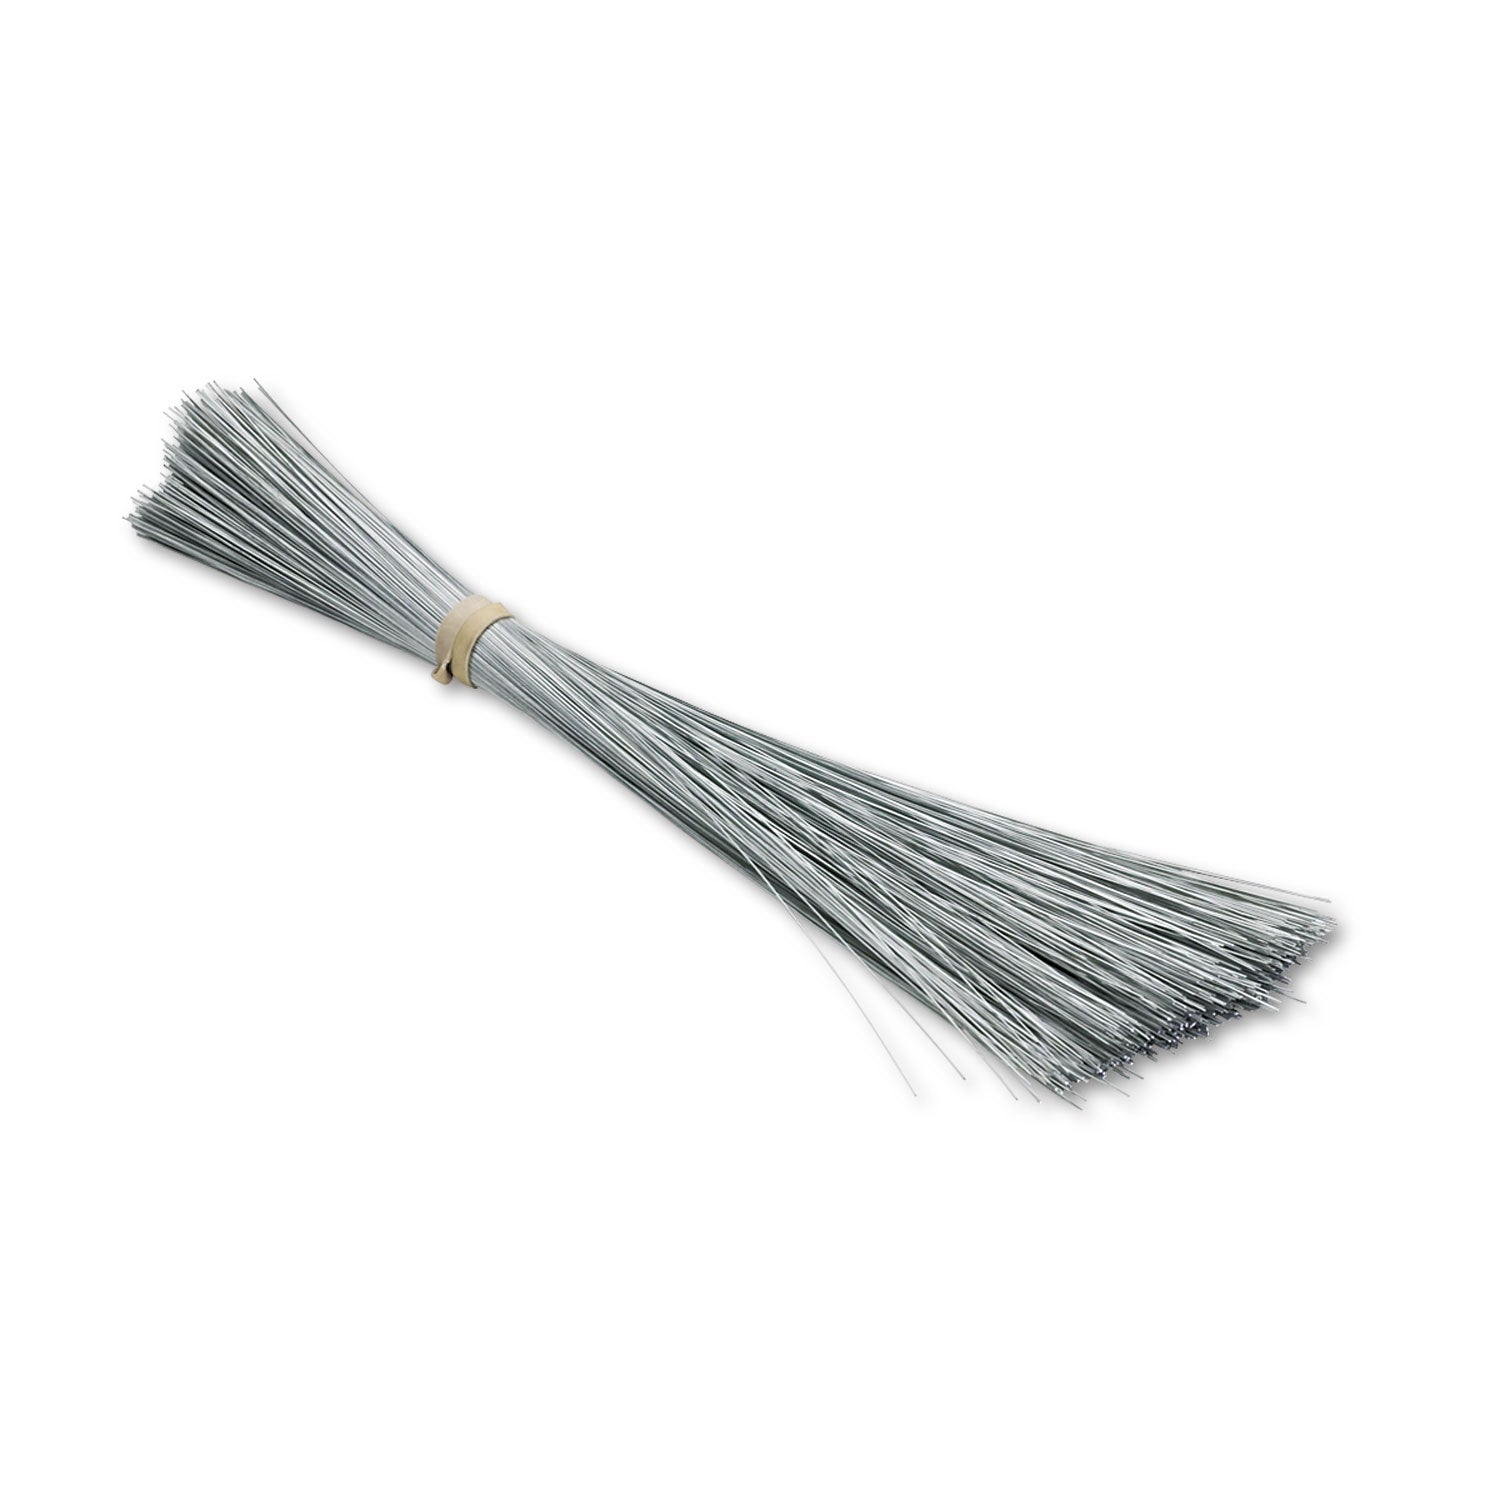 Tag Wires, Galvanized Annealed Steel, 12" Long, 1,000/Pack - 